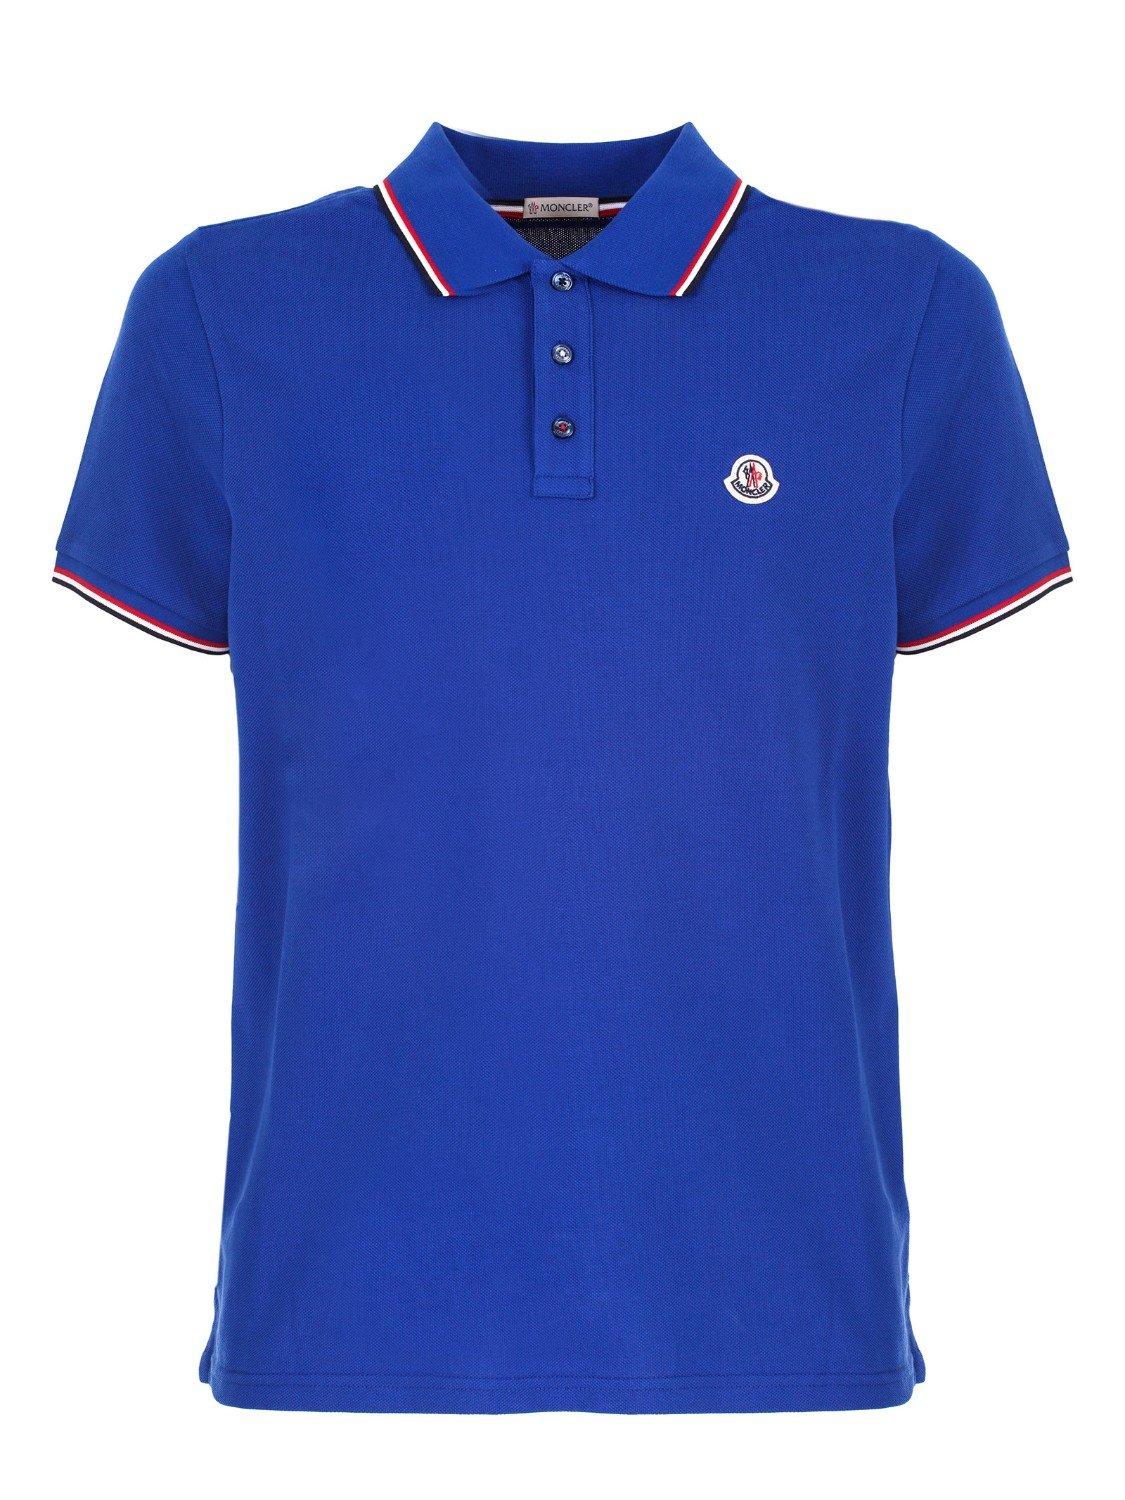 Lyst - Moncler Short Sleeve Polo Shirt In Cotton Piqué in Blue for Men